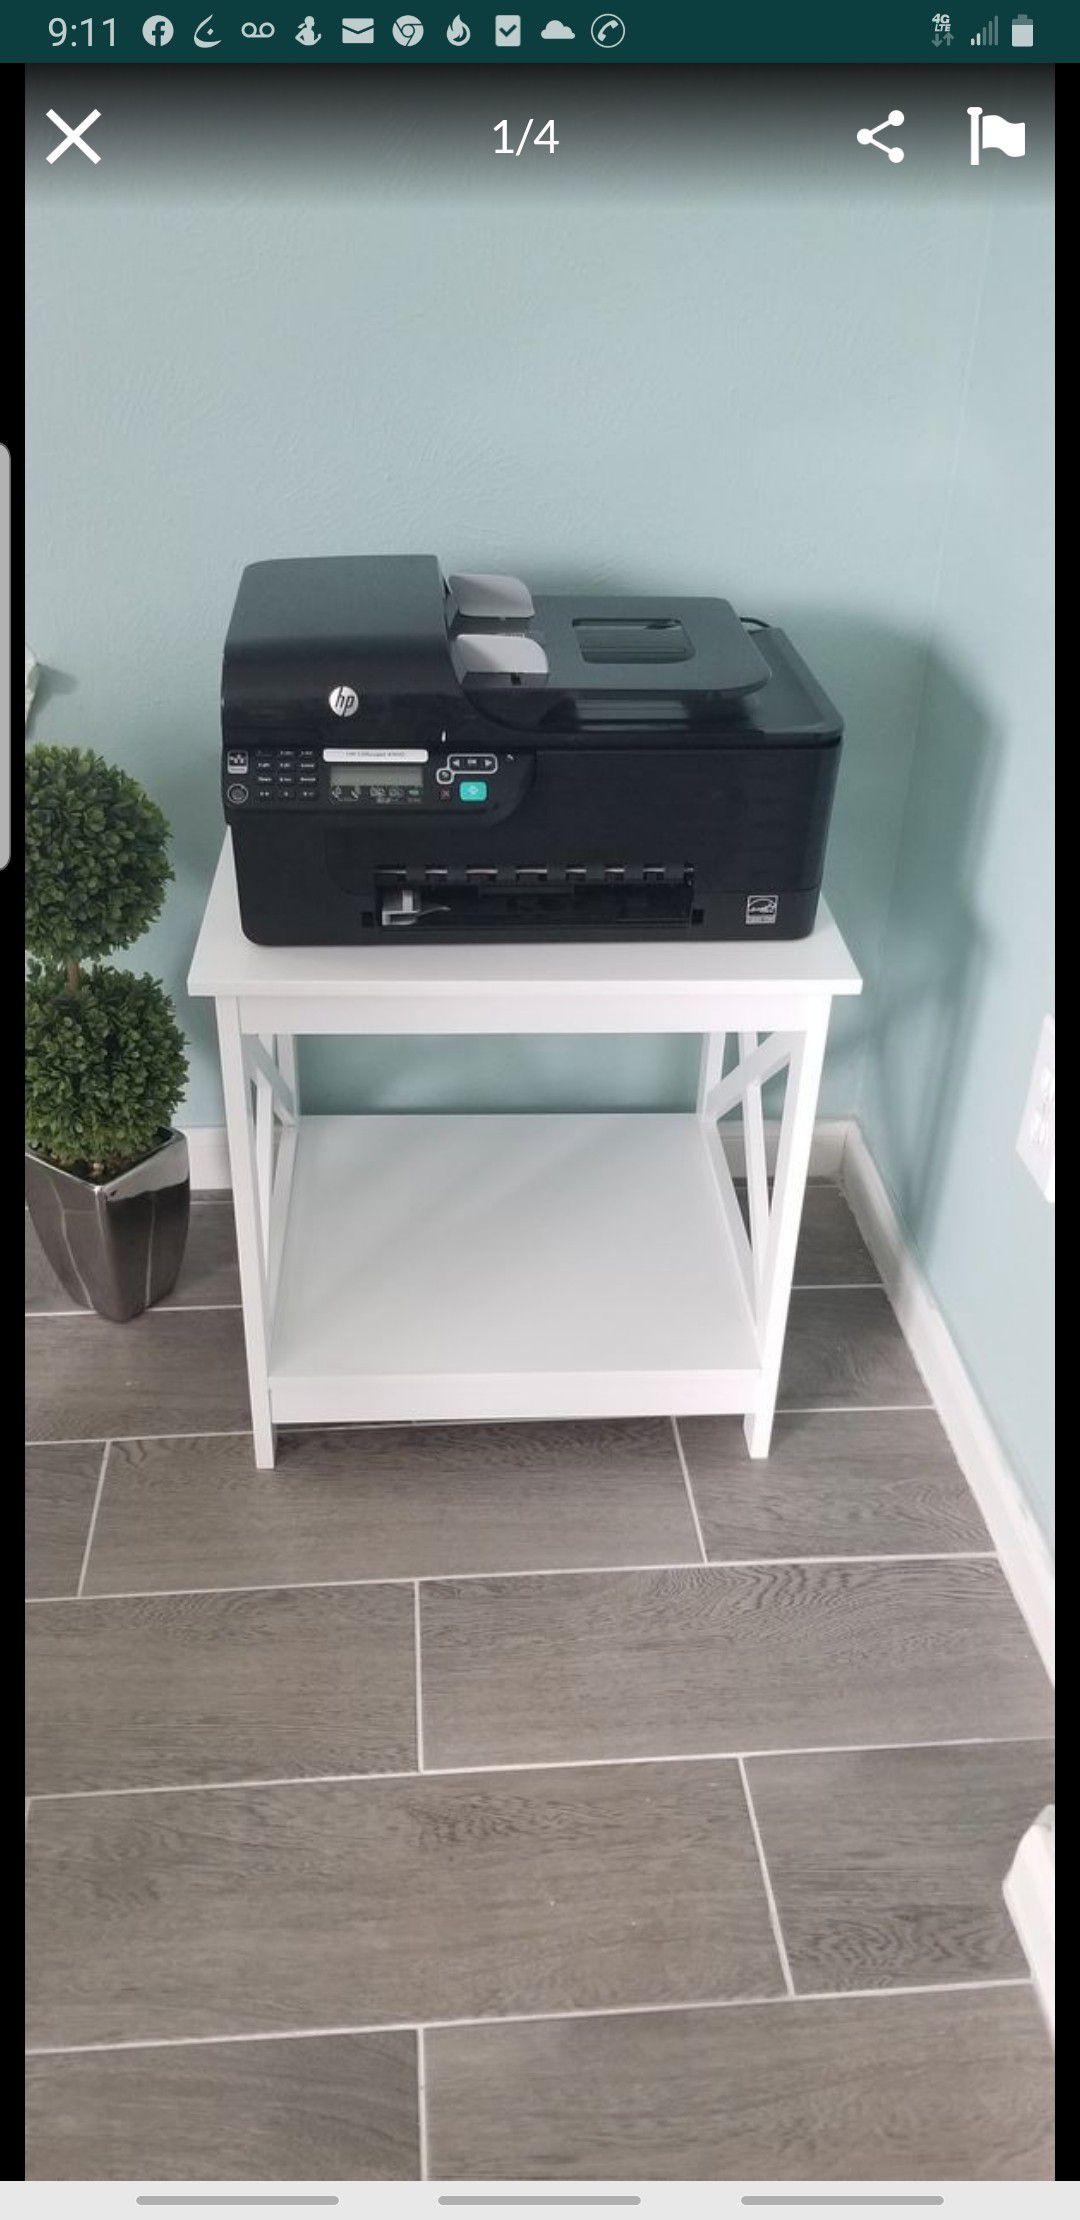 HP Officejet 4500 All in one Printer